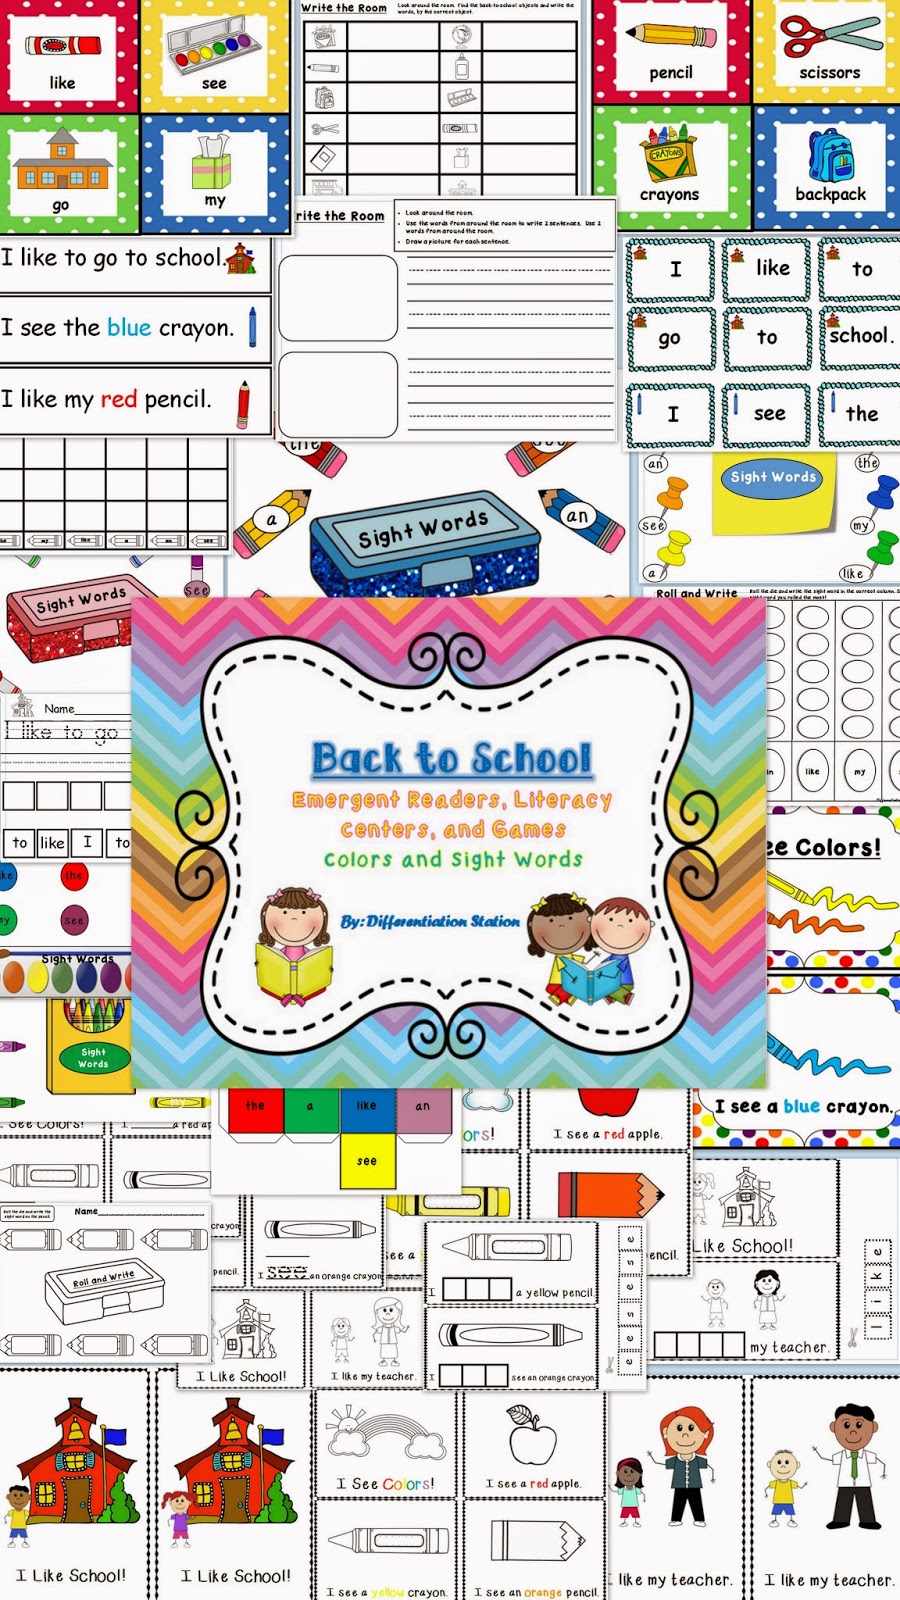 http://www.teacherspayteachers.com/Product/Back-to-School-Emergent-Readers-Literacy-Centers-and-Games-731994